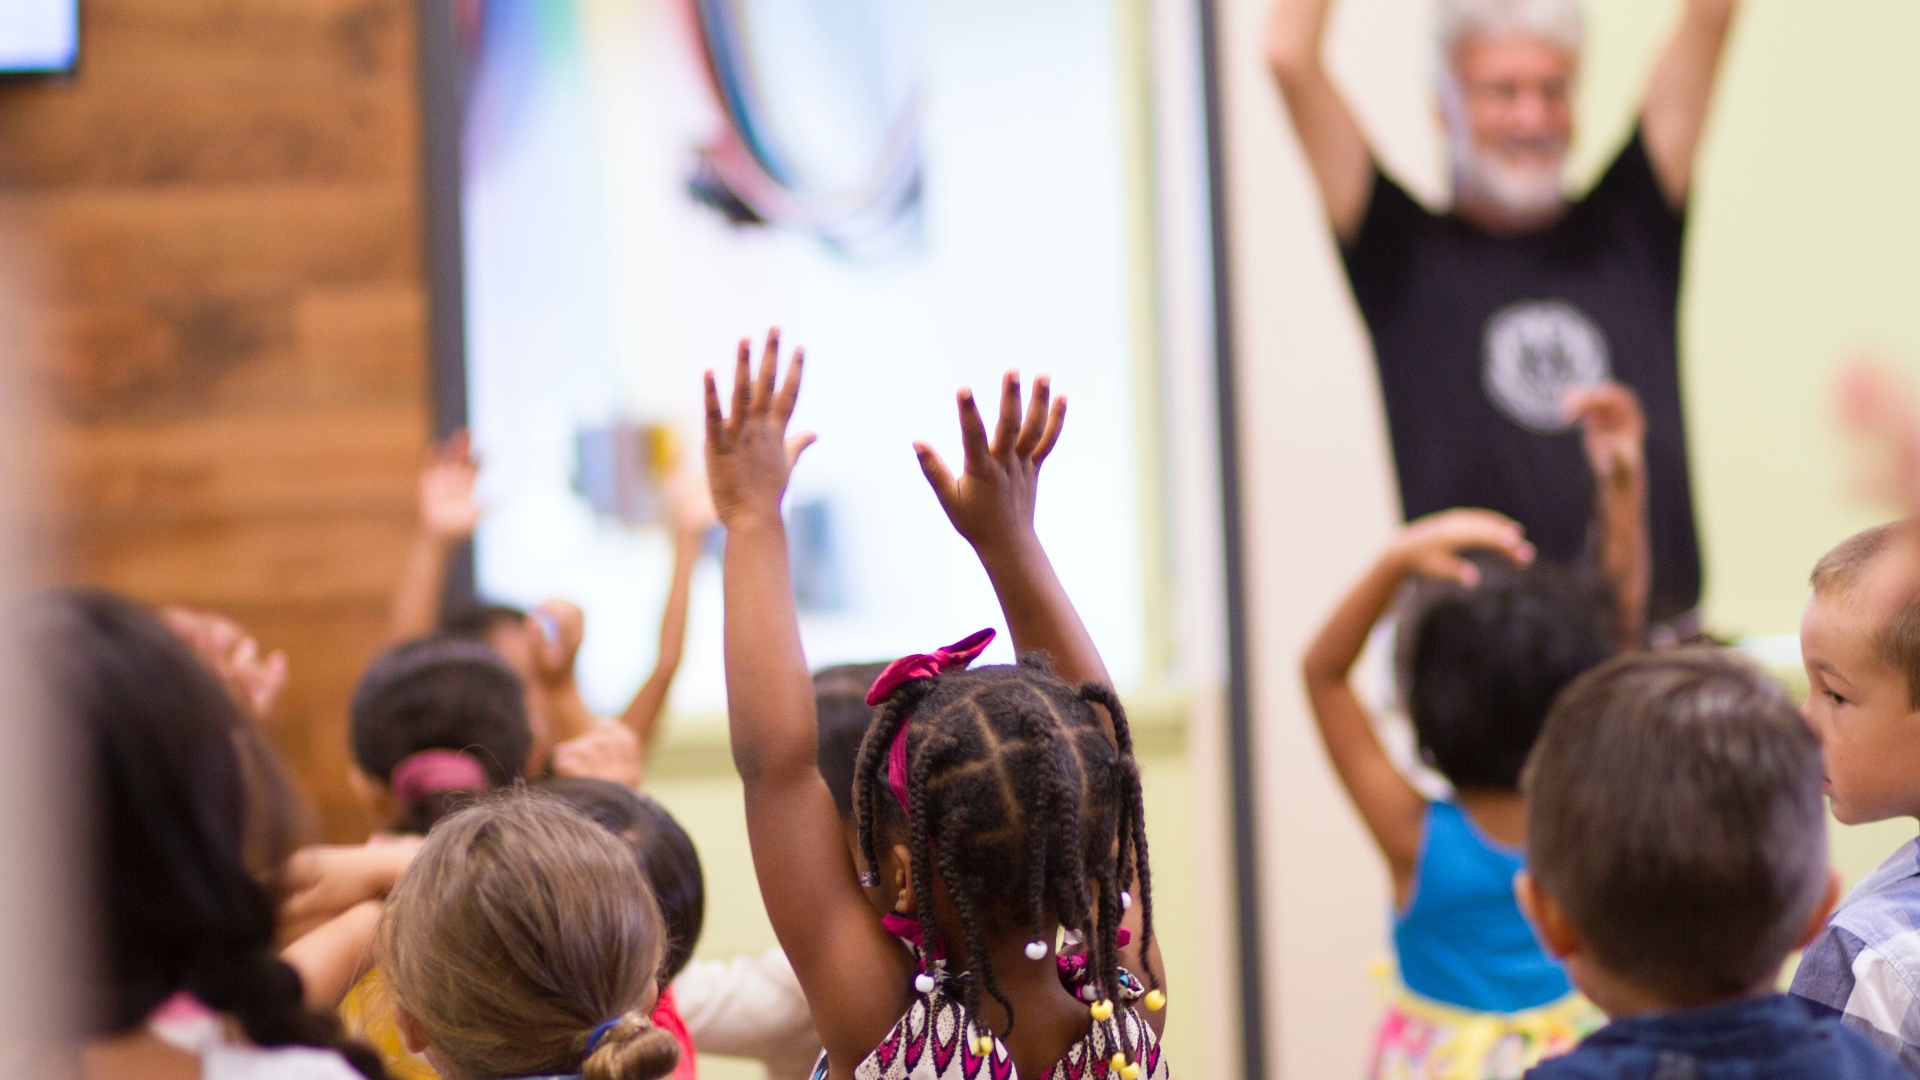 A child puts arms in the air in dance among a group of other children. An adults leads in the background.